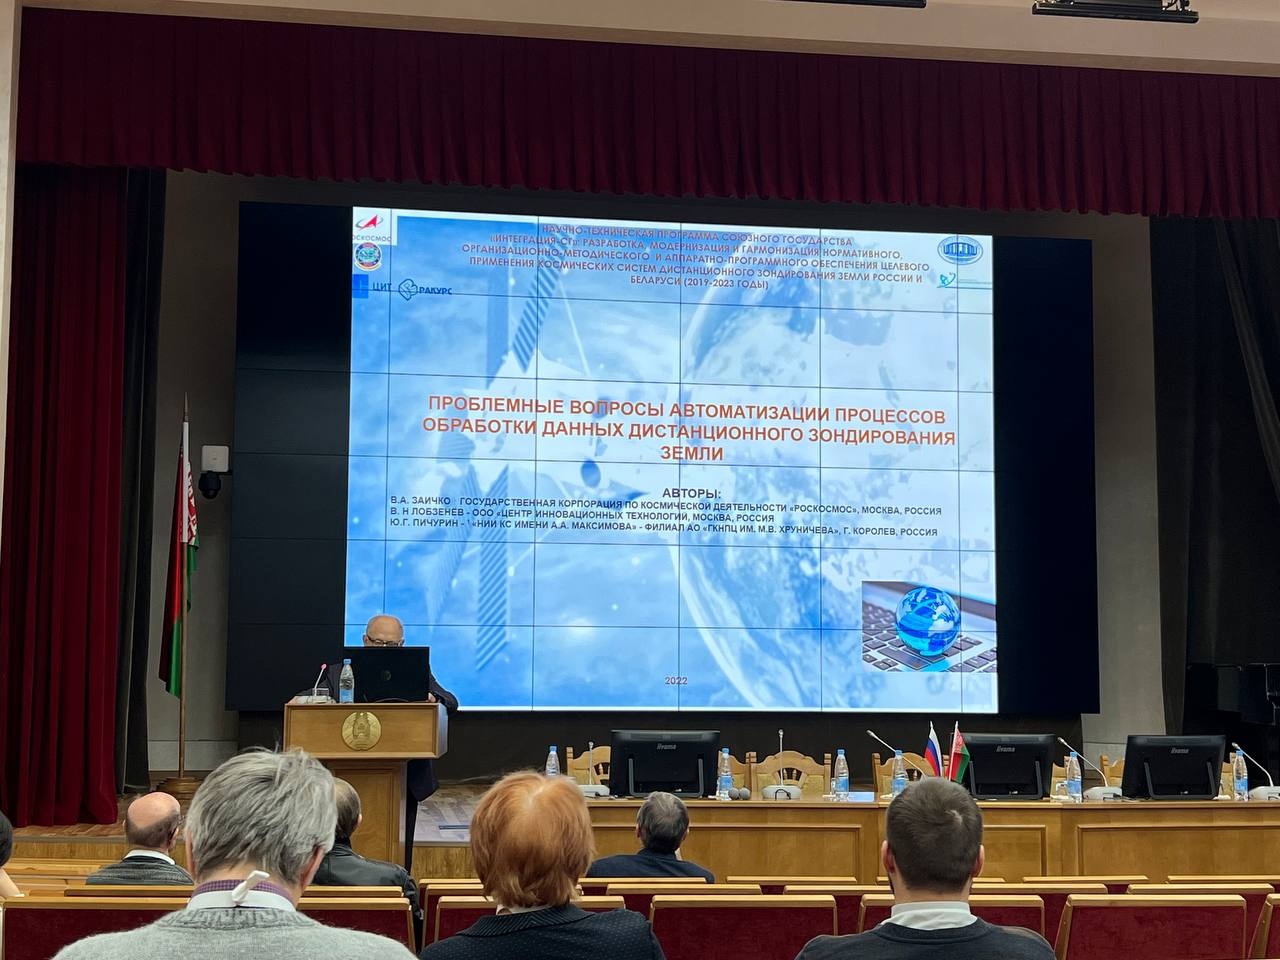 Innovative Center at the VIII Belarusian Space Congress